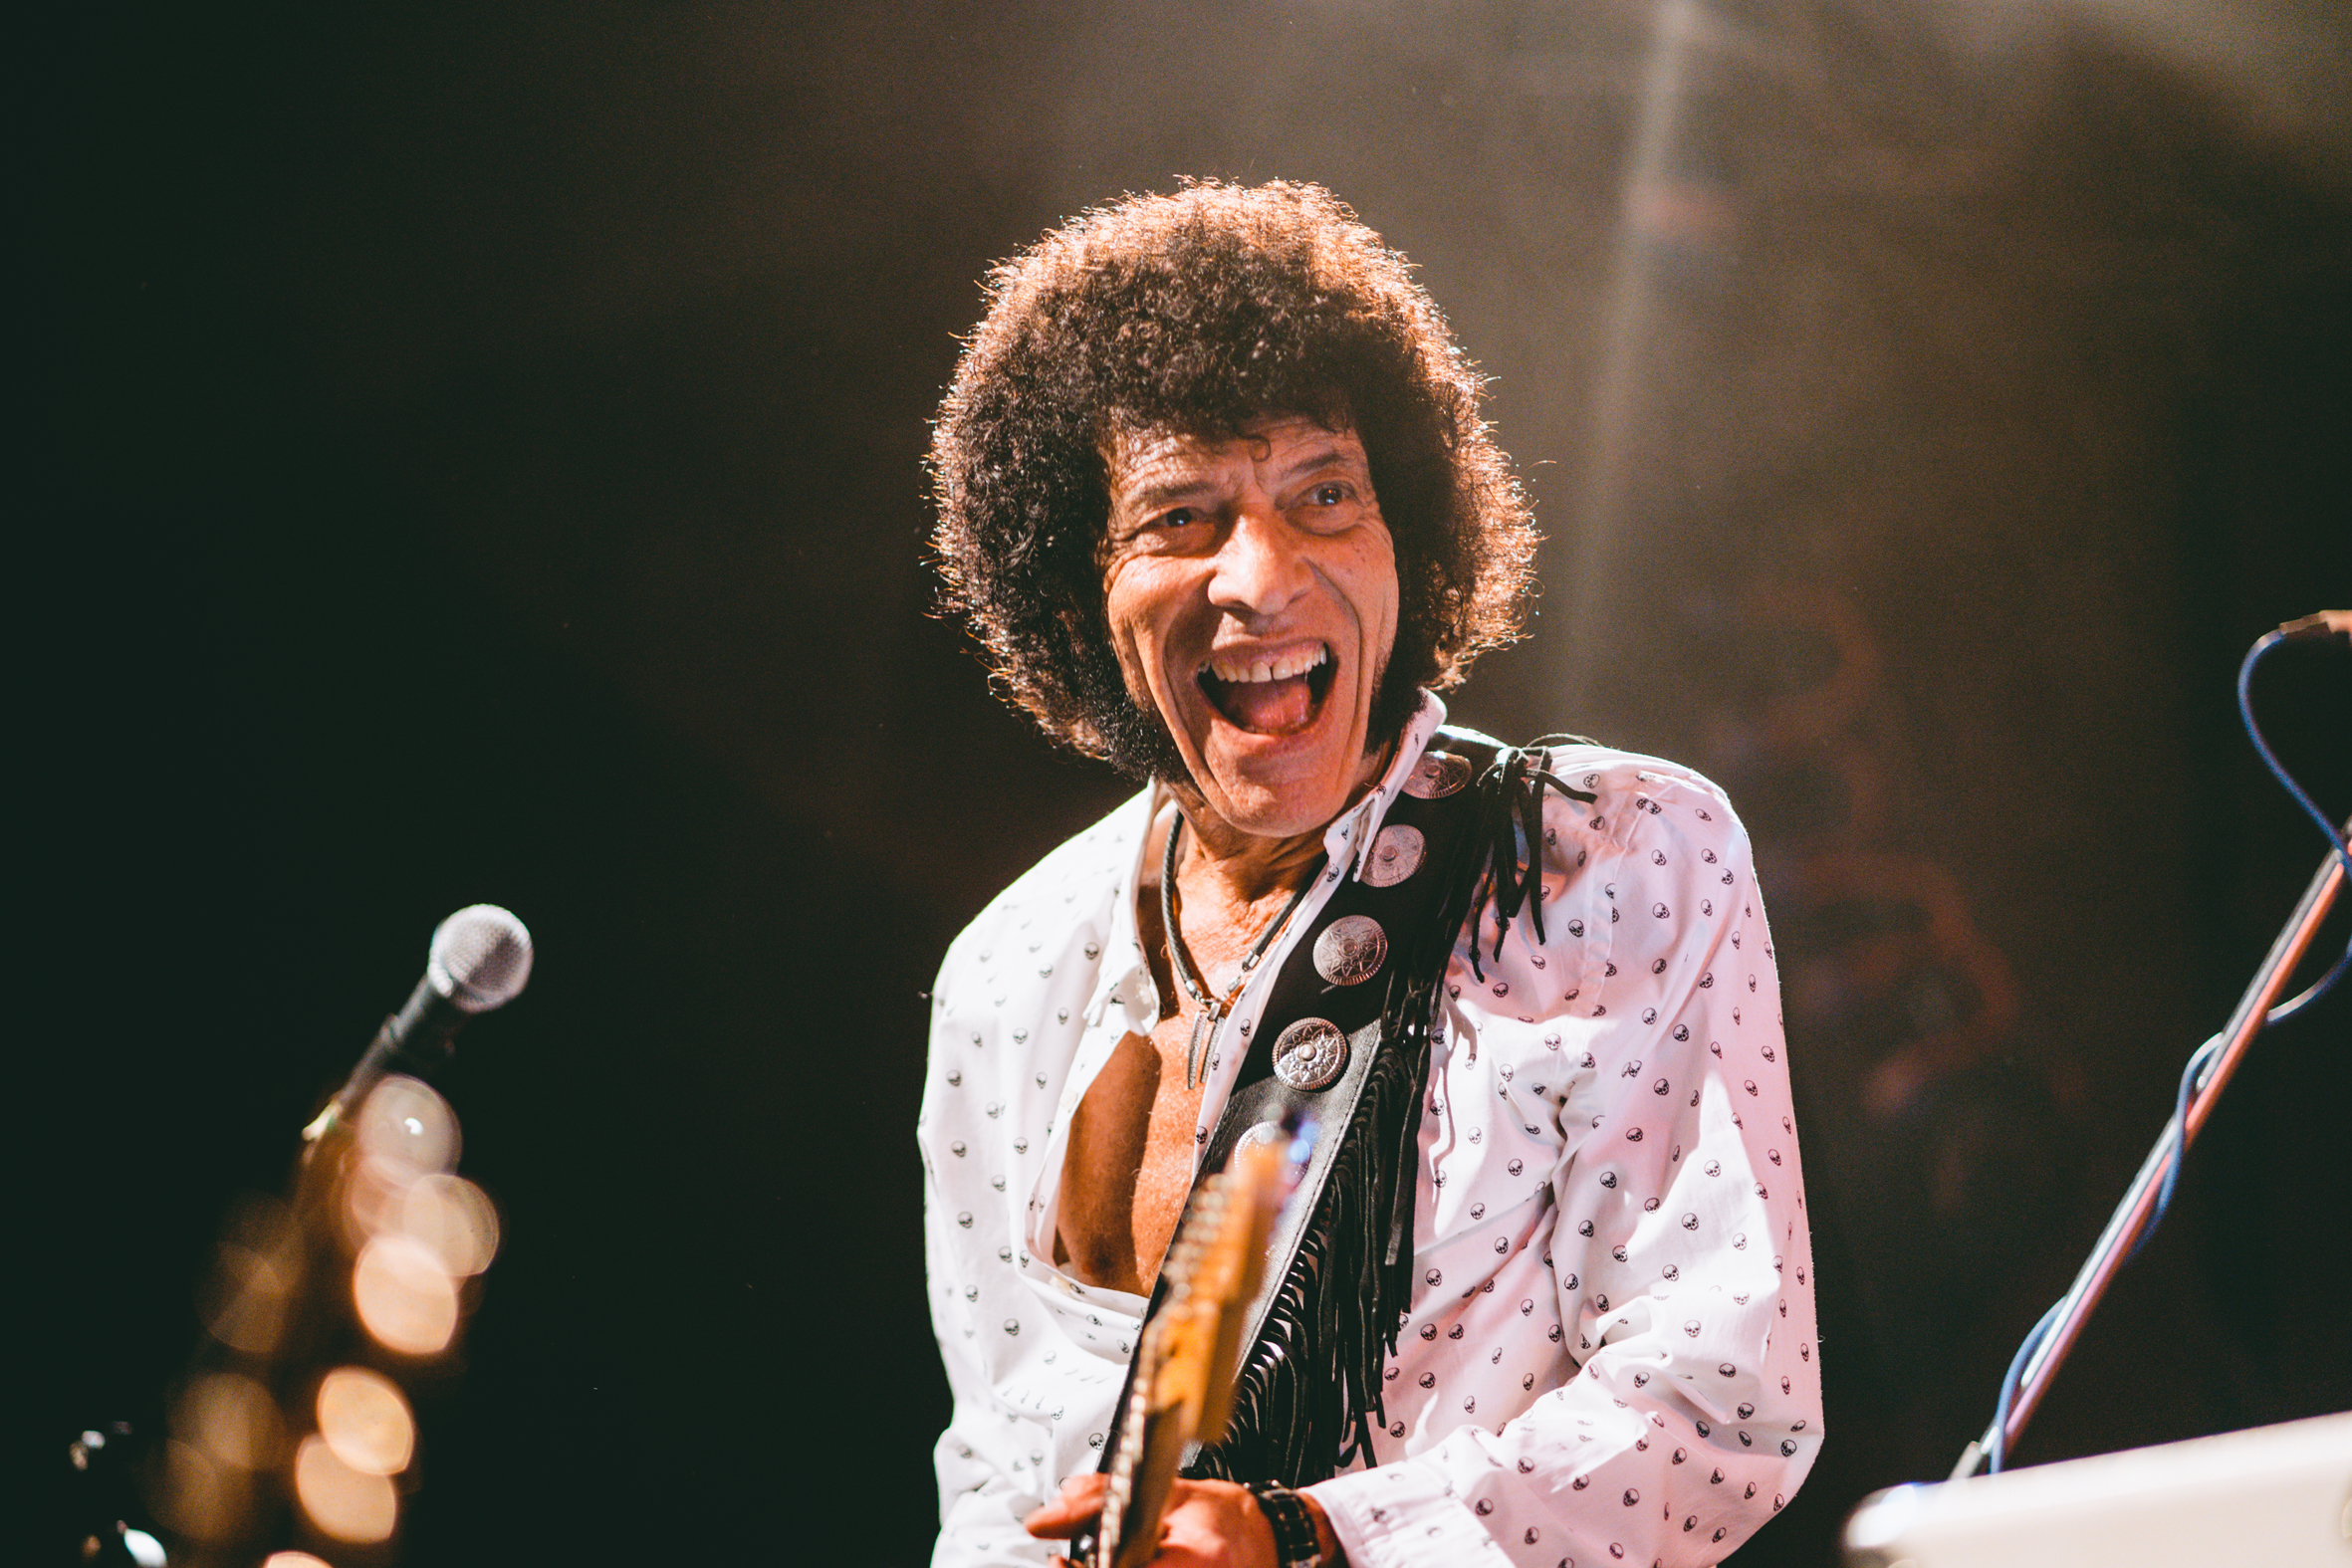 The Guardian Article: Ray Dorset a.k.a Mungo Jerry on Battling Music Piracy with Cutting-Edge Copyright Infringement Tool TCAT